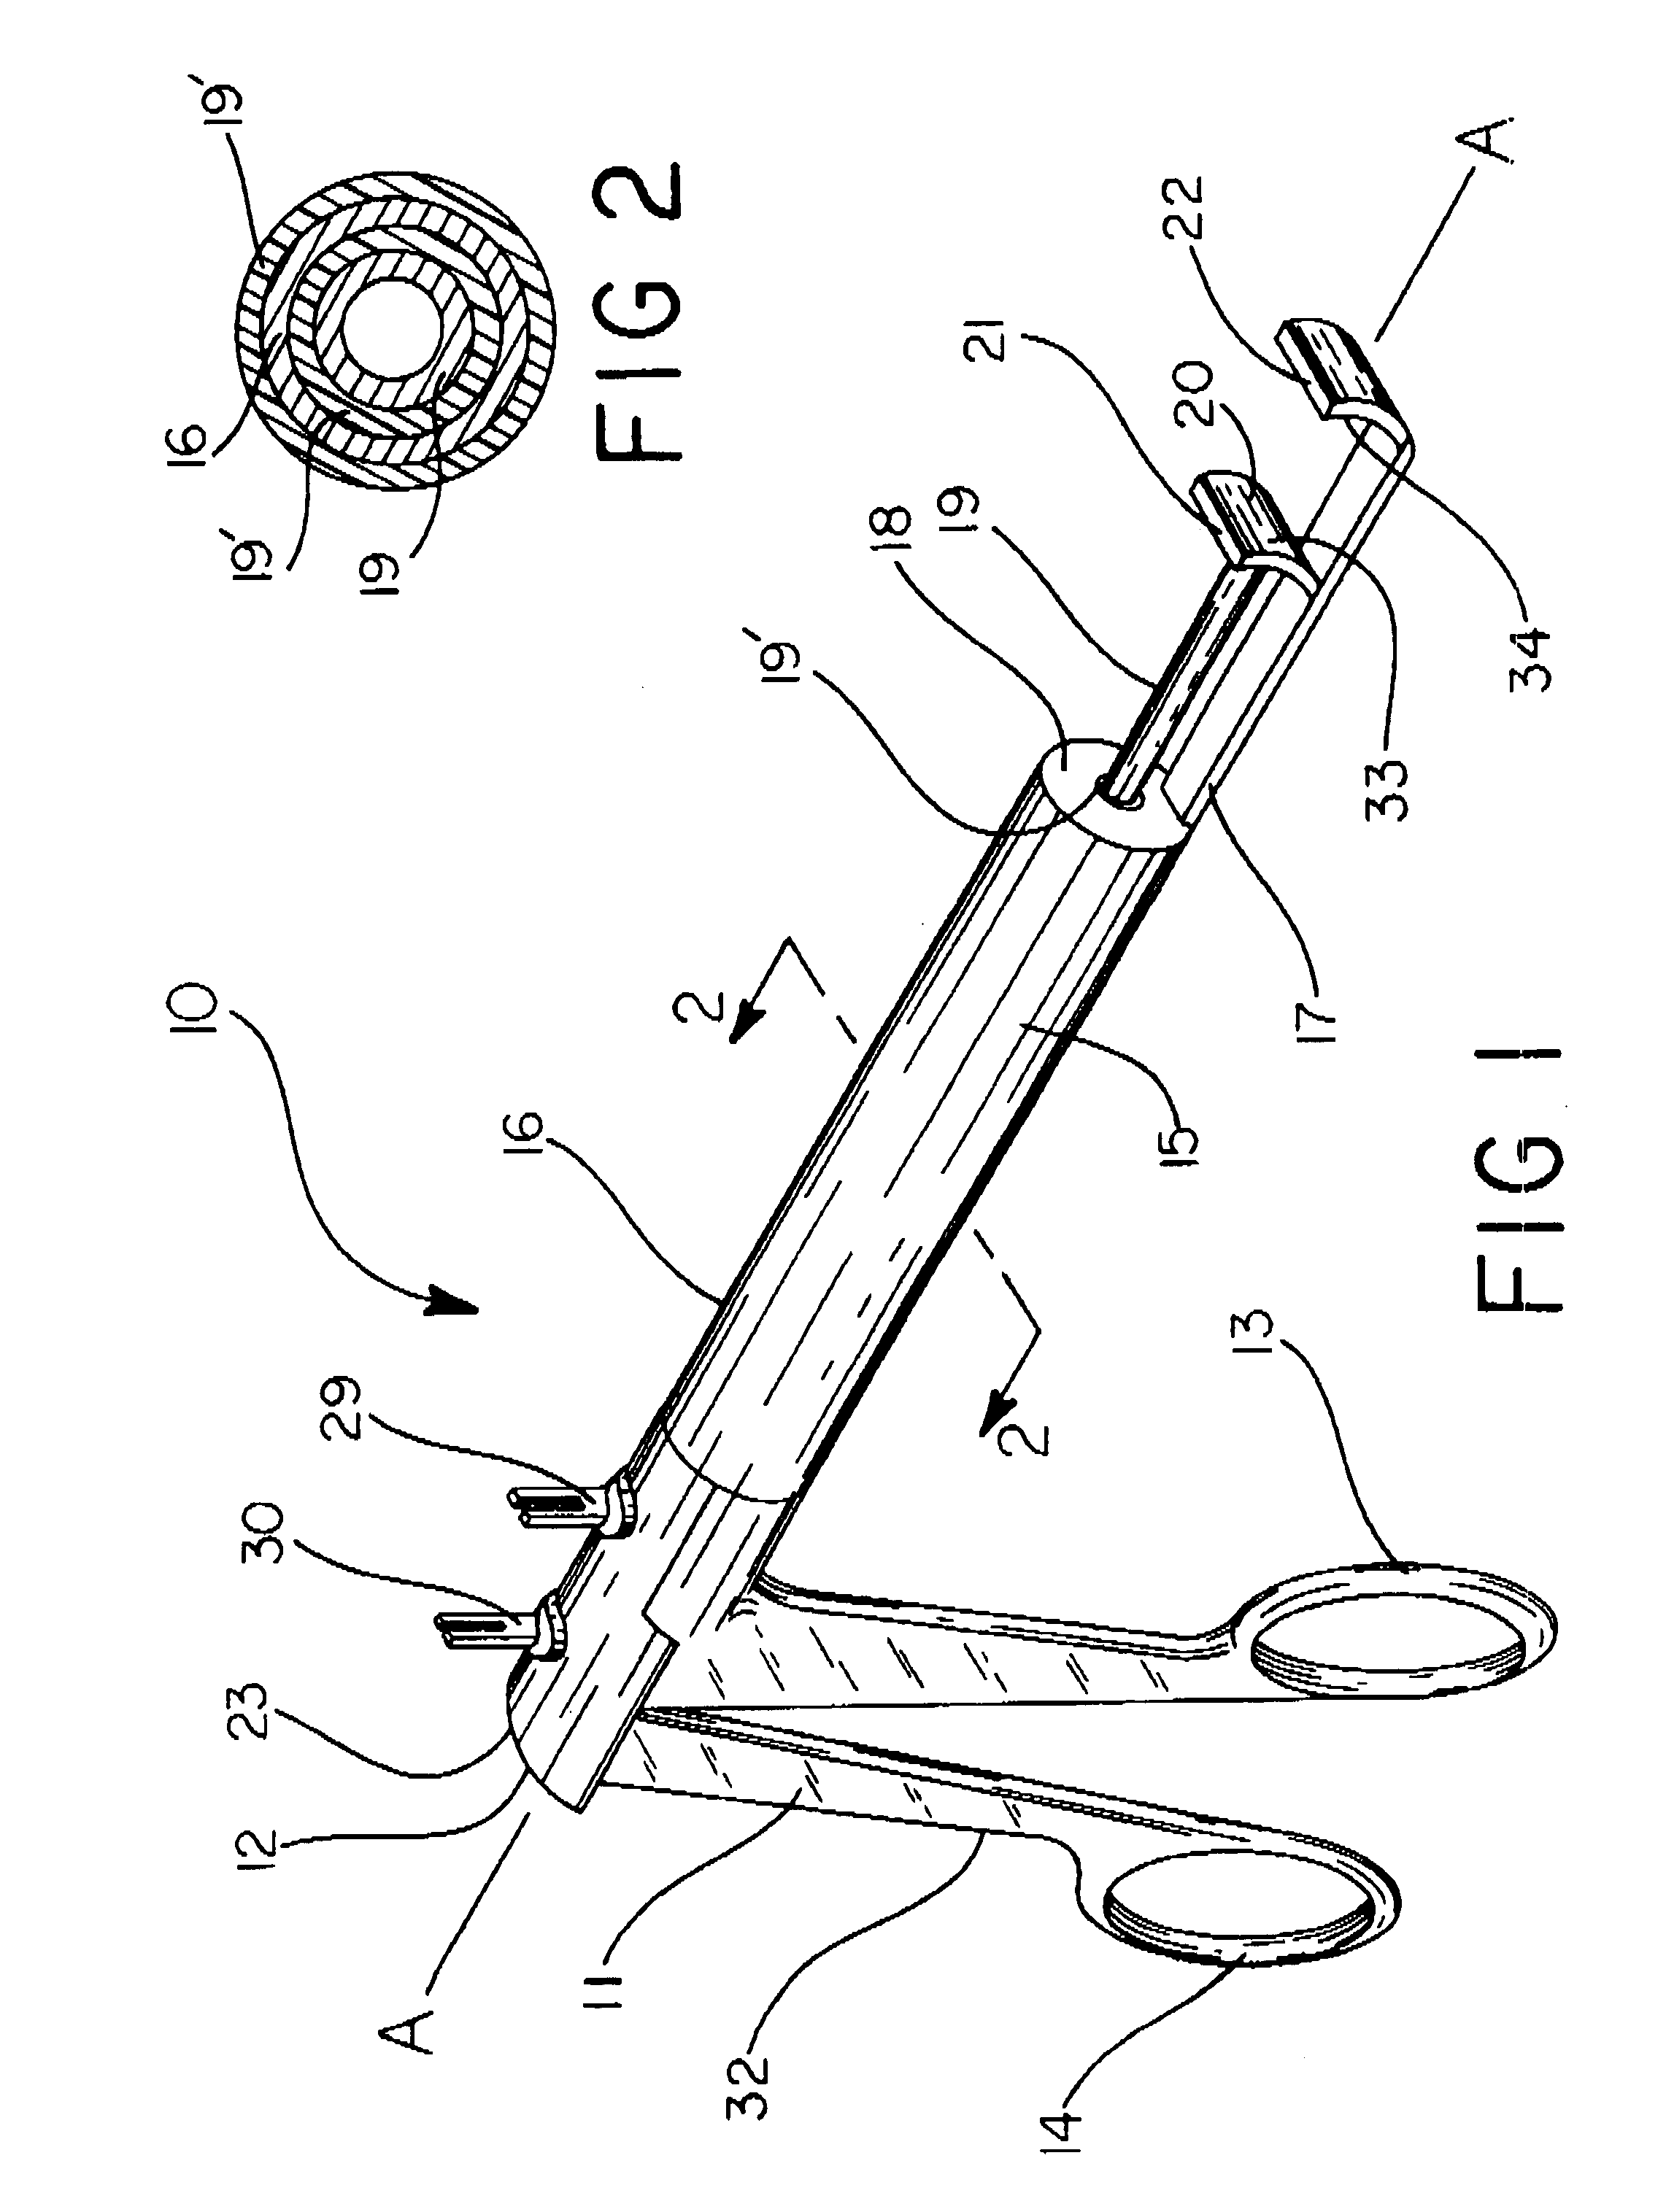 Apparatus and method for sealing and cutting tissue